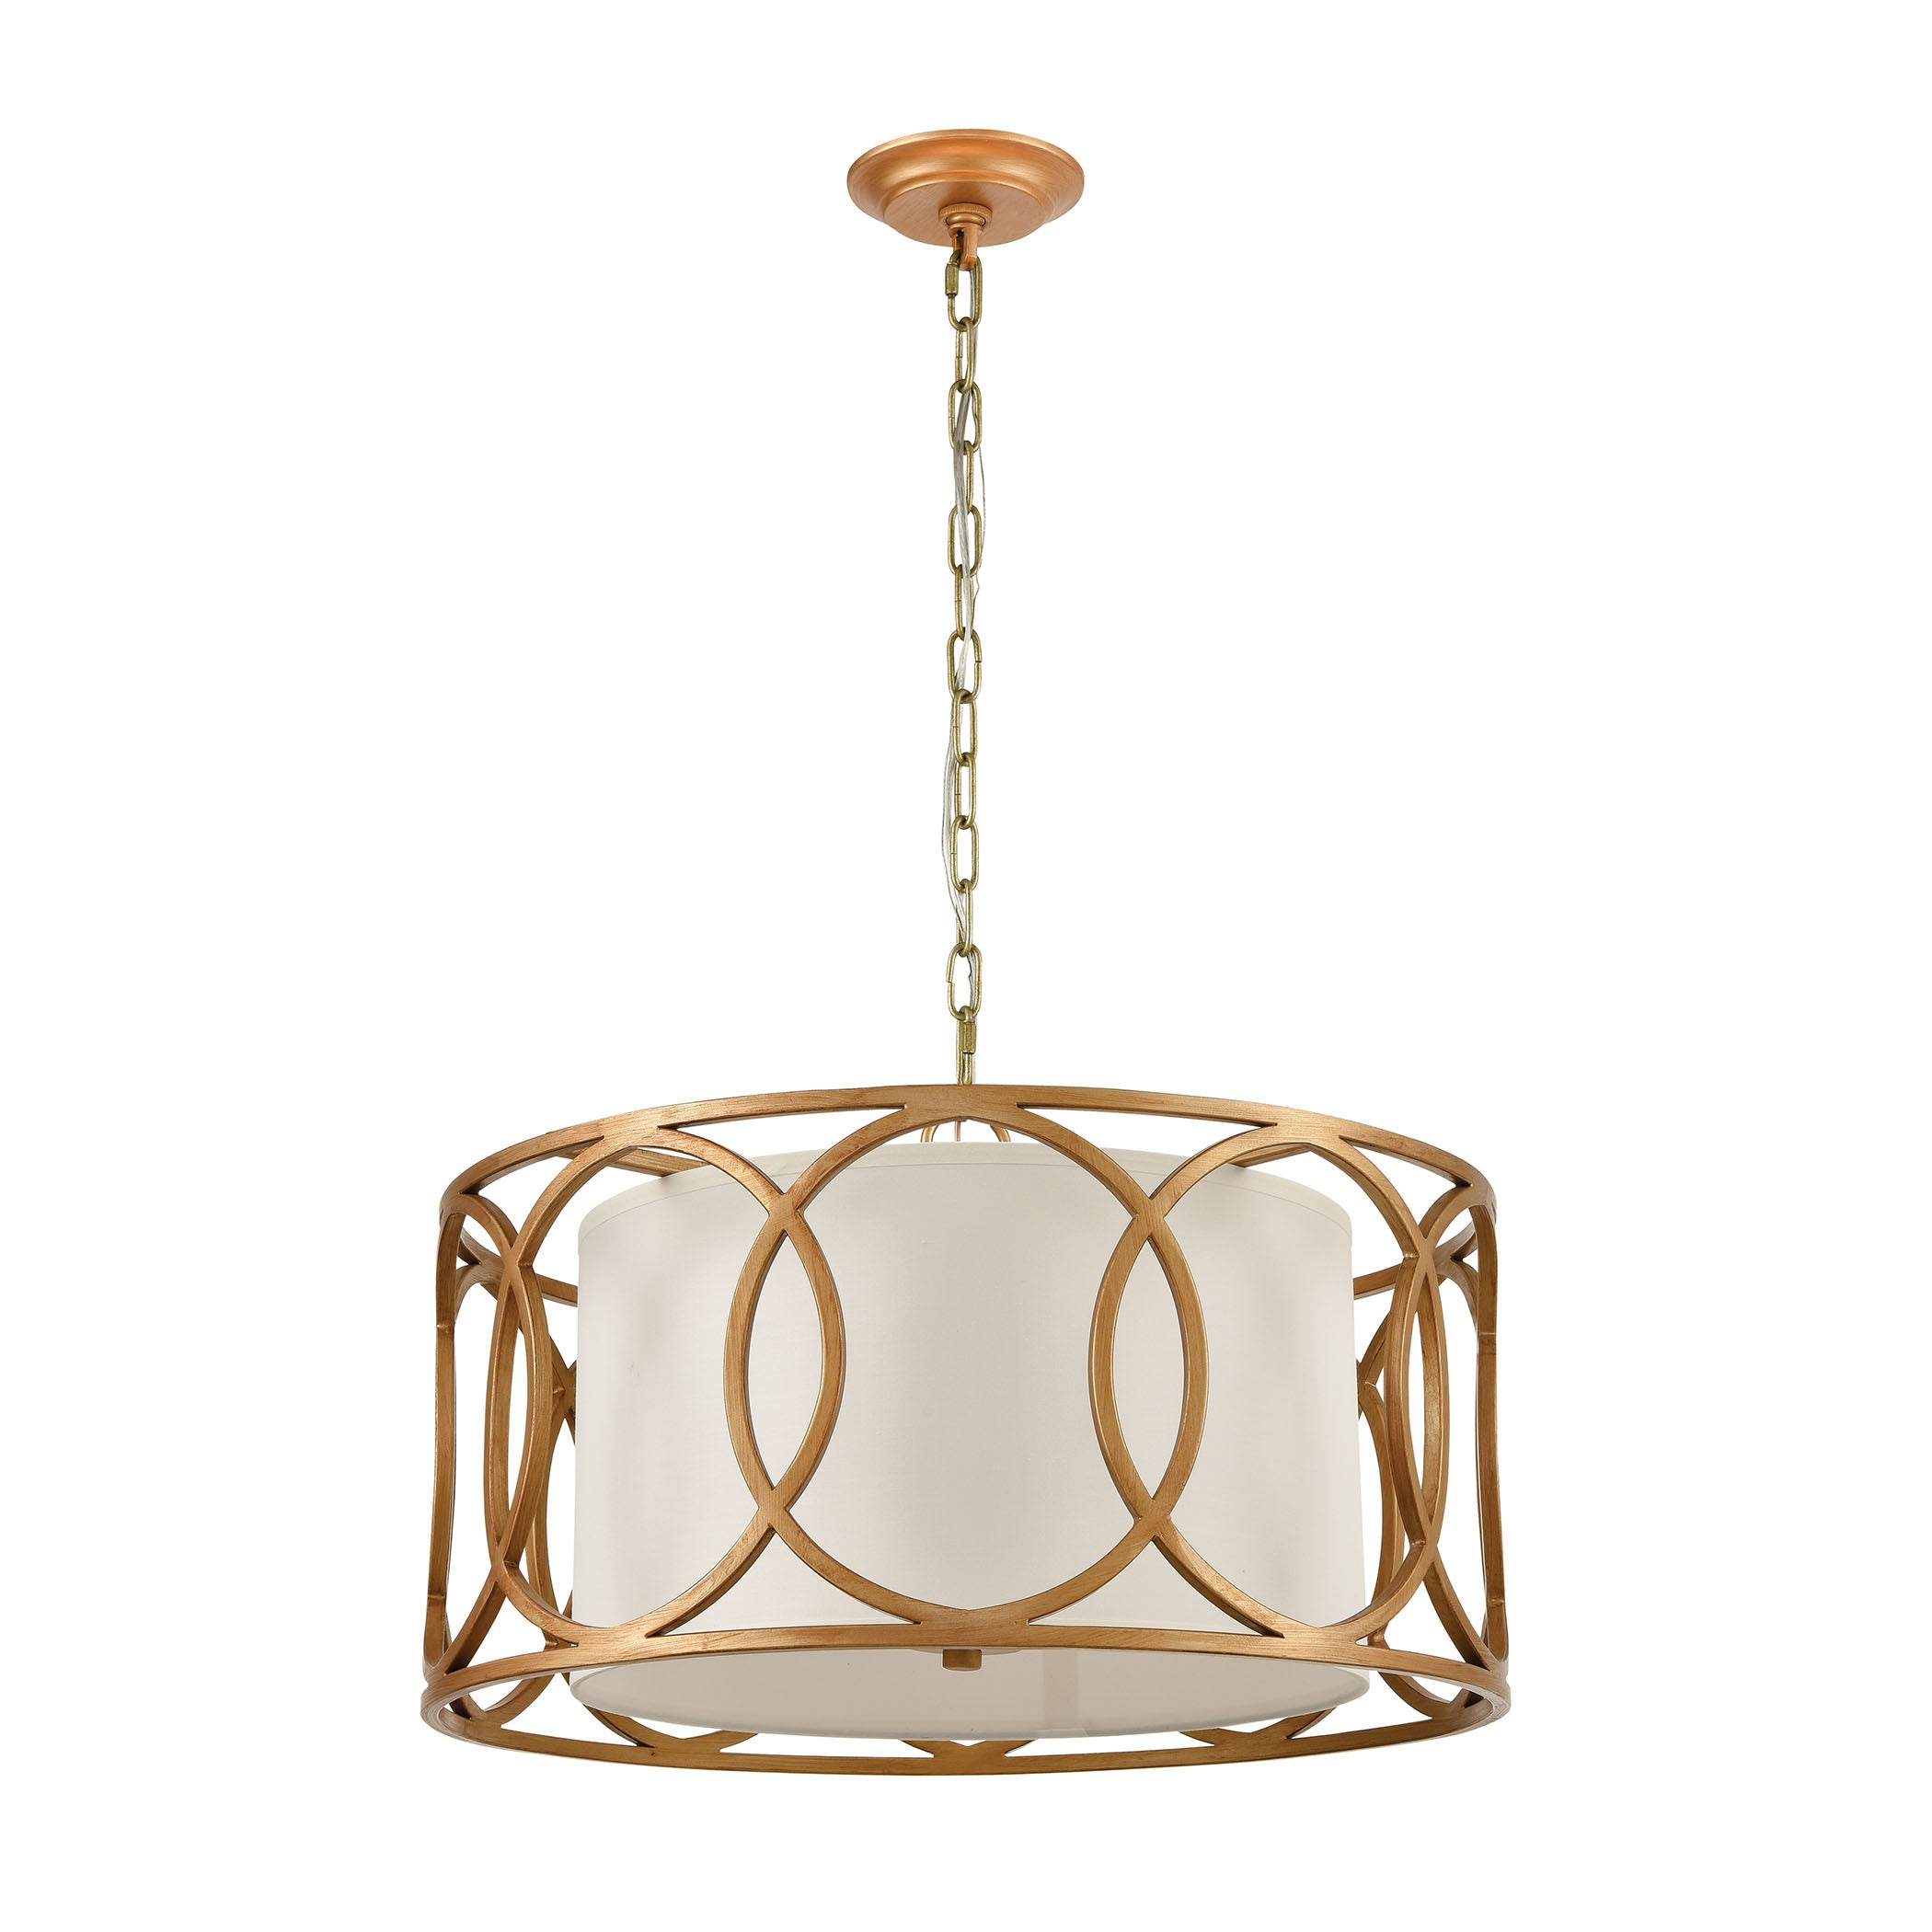 ELK Lighting 33425/4 Ringlets 4-Light Chandelier in Golden Silver with White Fabric Shade